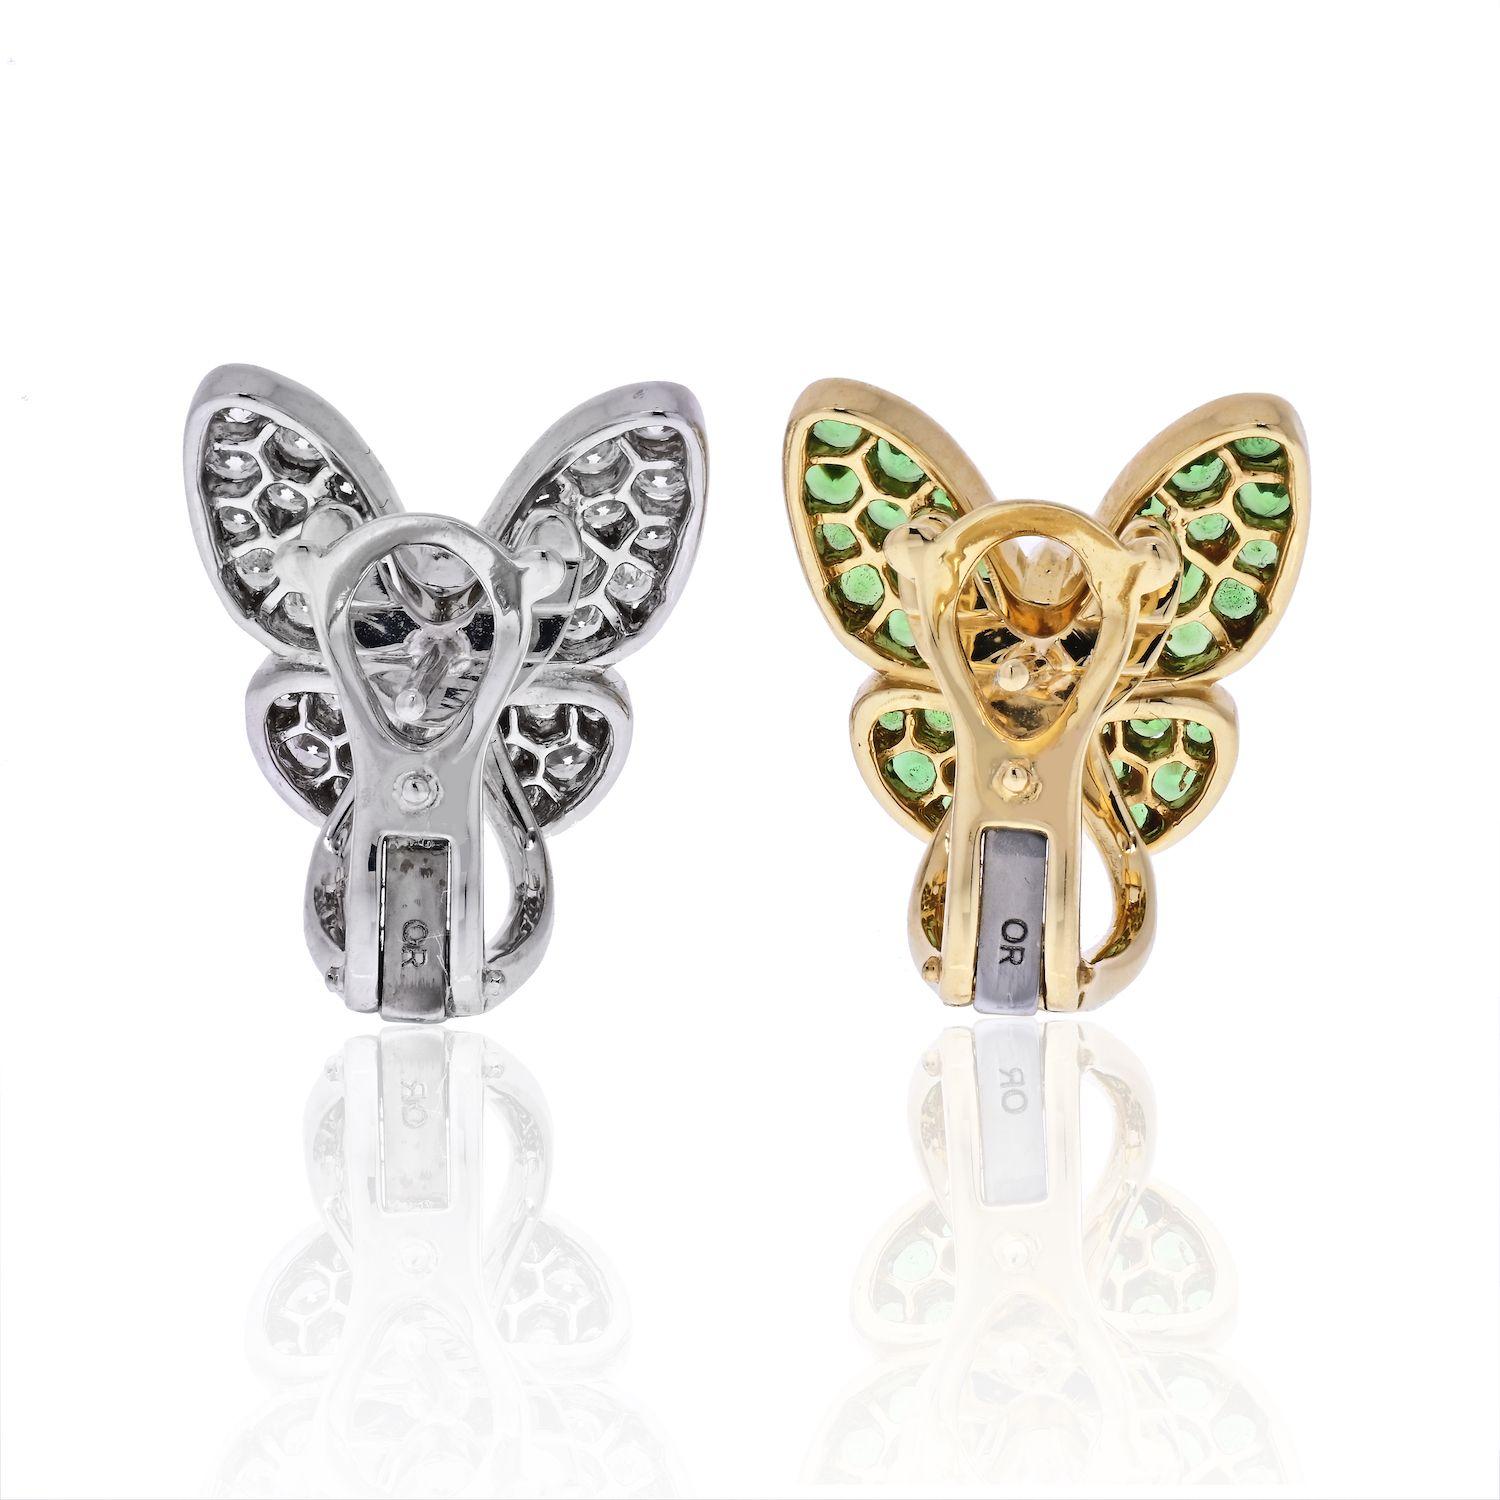 Van Cleef & Arpels 'Two Butterfly' earrings crafted in 18 karat yellow and white gold combine color and asymmetry in a dazzling way. One earring is crafted in white gold and set with an estimated 1.00 carats of high-quality diamonds. The other